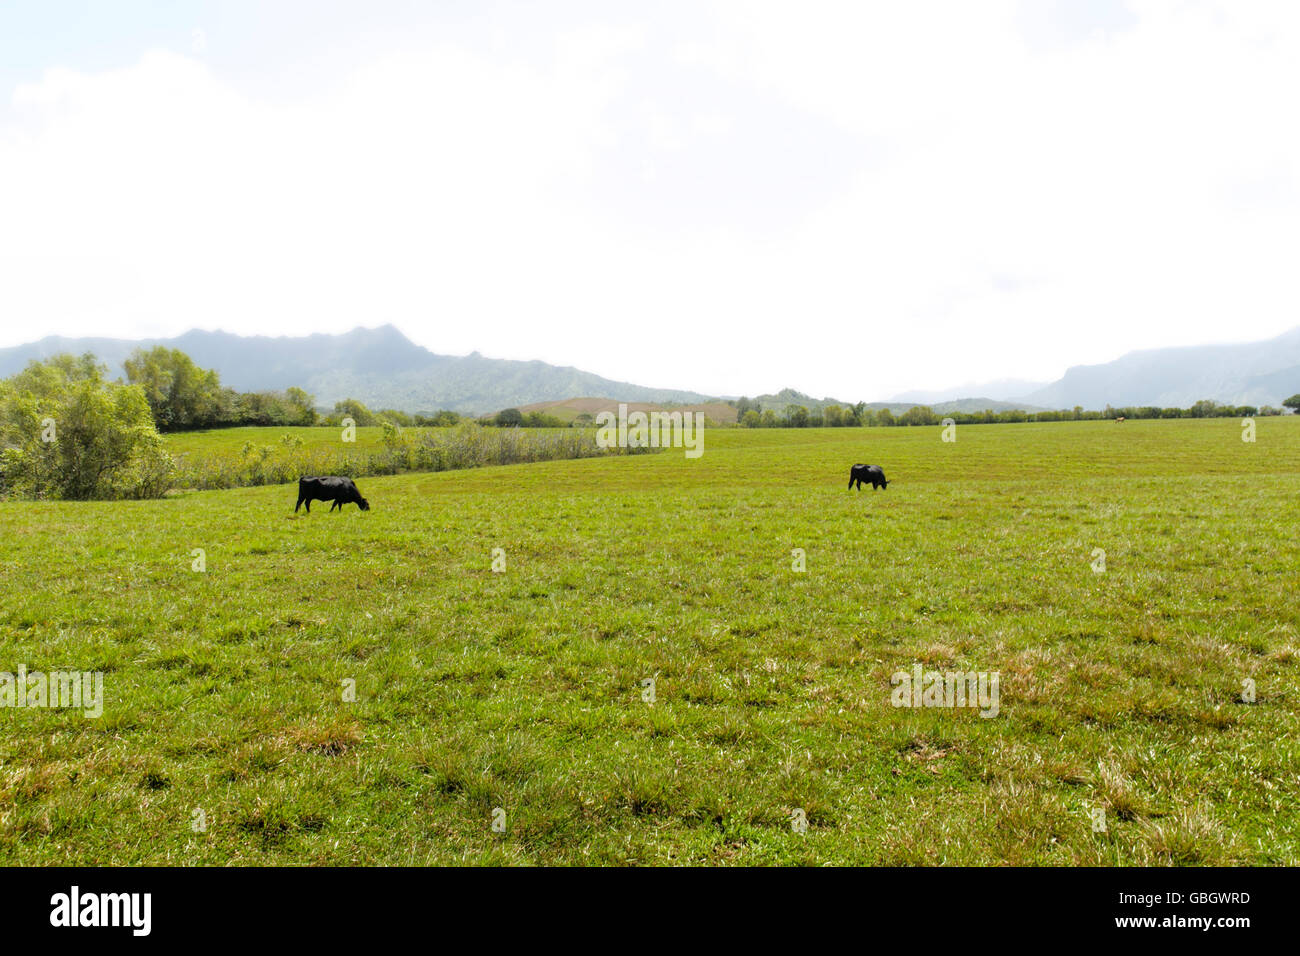 Cows graze on grass in Hawaii Stock Photo